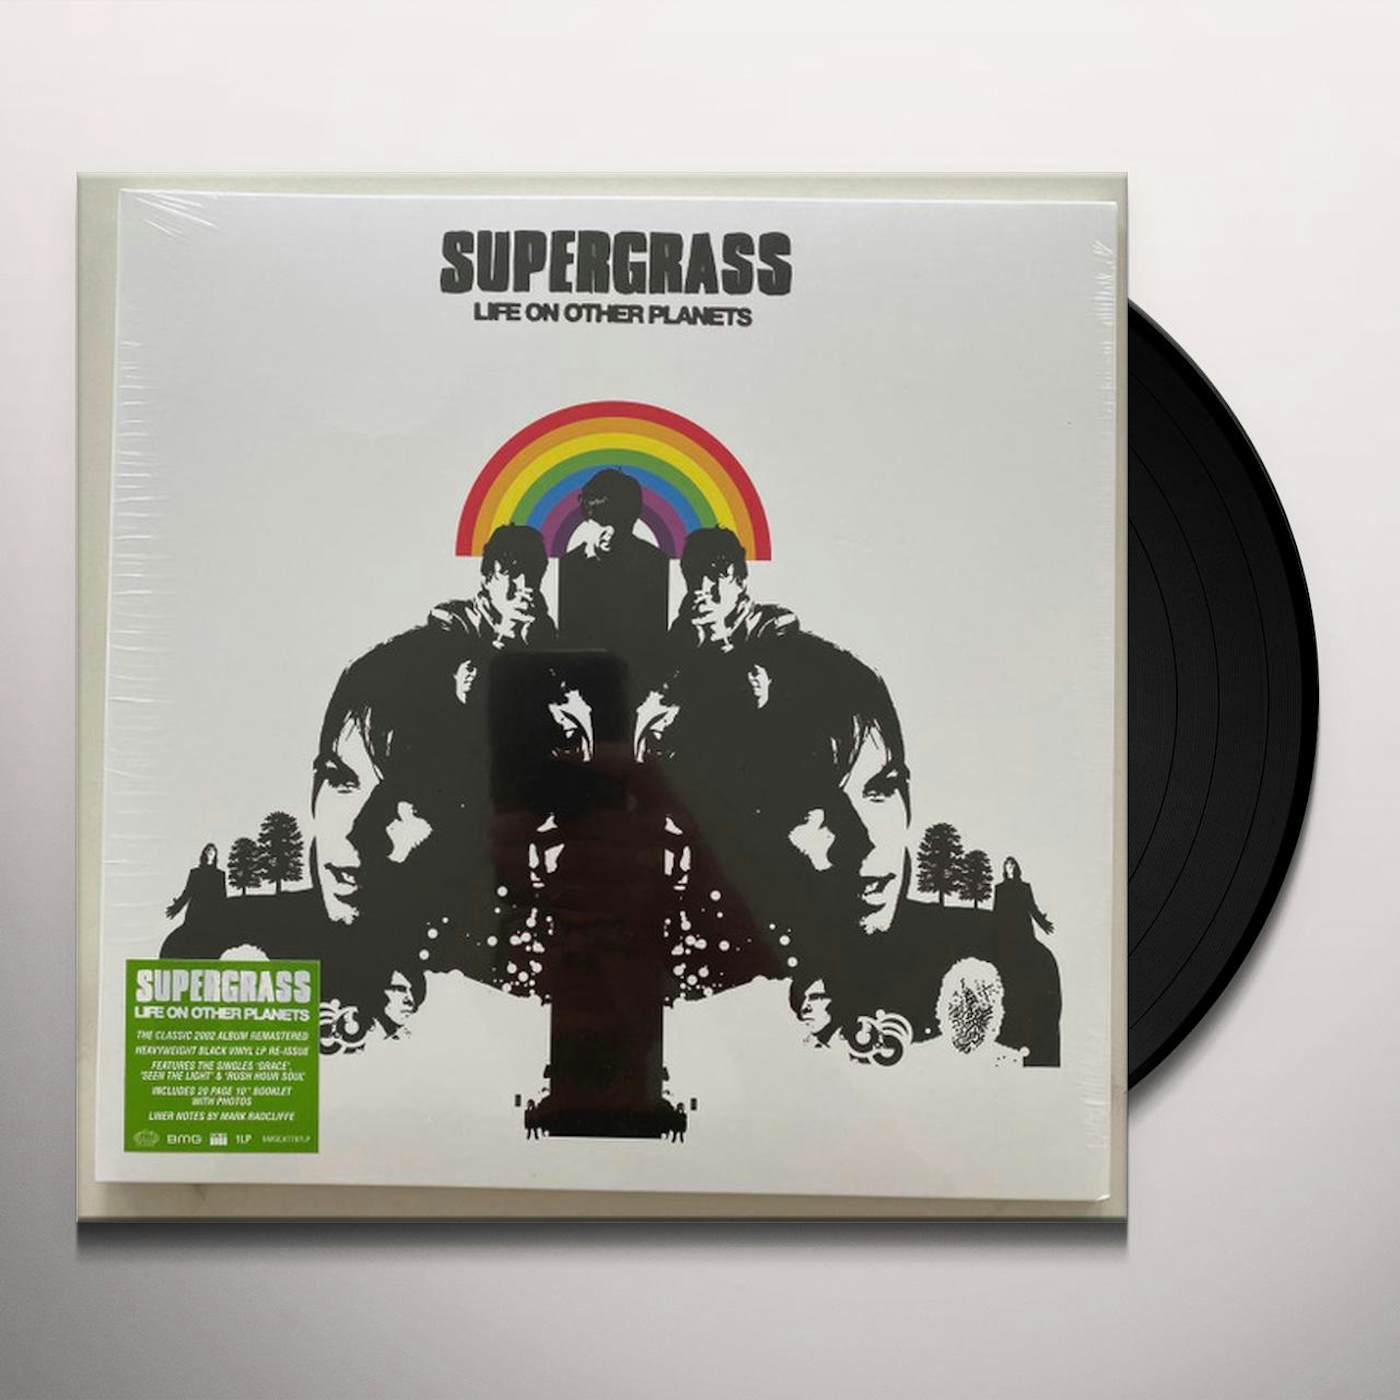 Supergrass LIFE ON OTHER PLANETS Vinyl Record